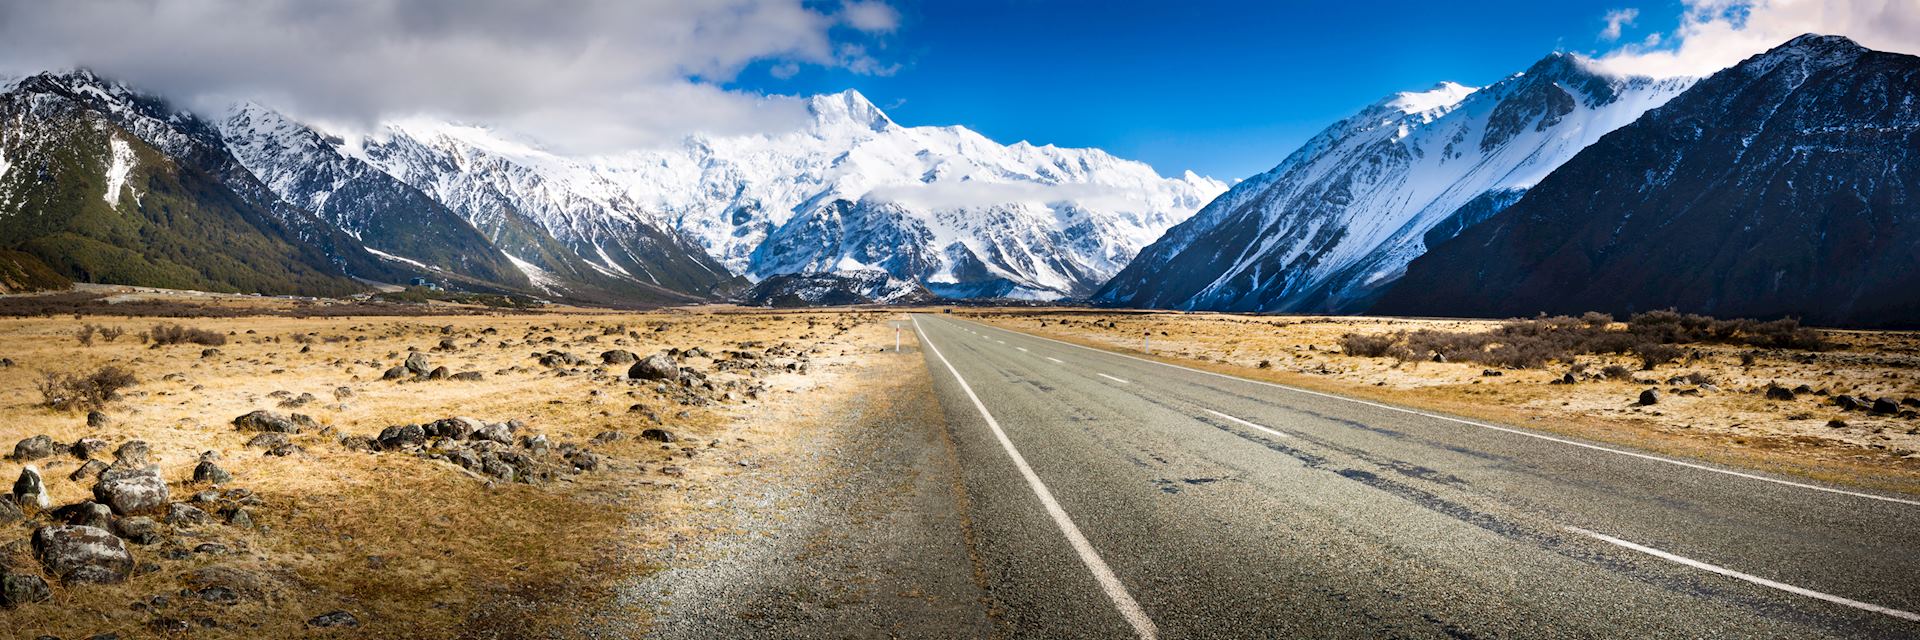 Road on New Zealand's South Island